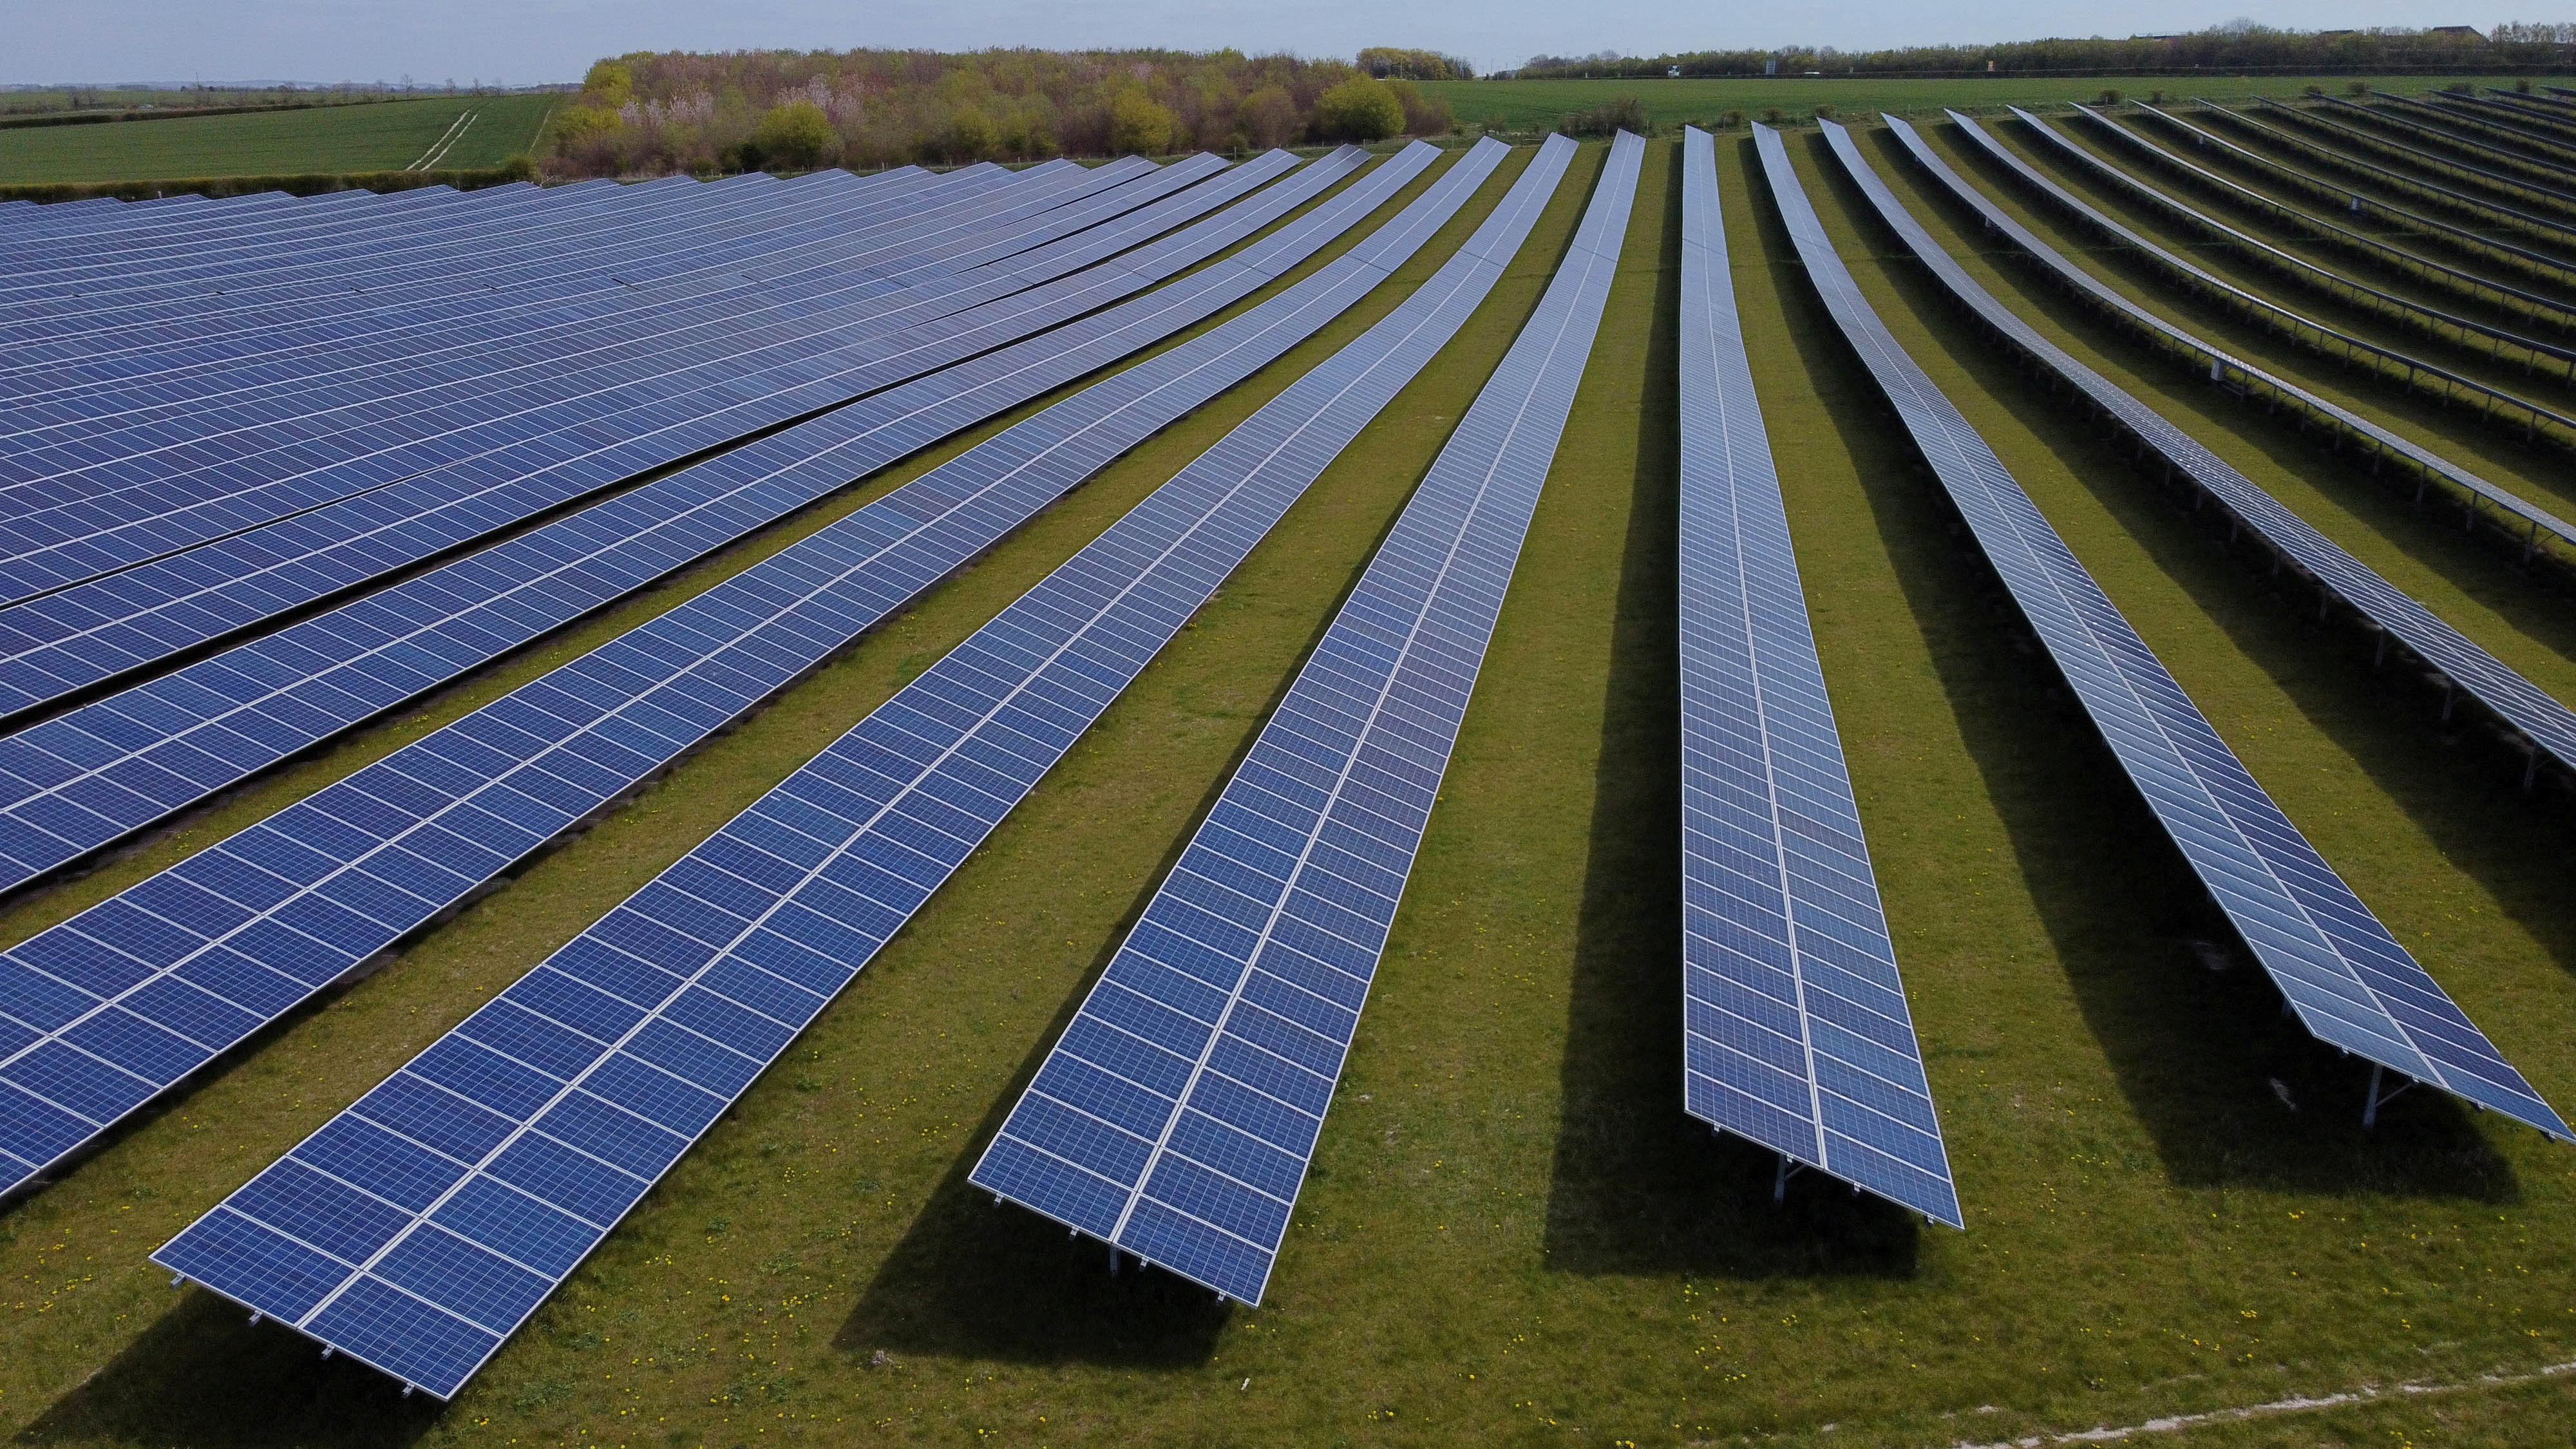 A field of solar panels is seen near Royston, Britain, April 26, 2021. REUTERS/Matthew Childs/File Photo